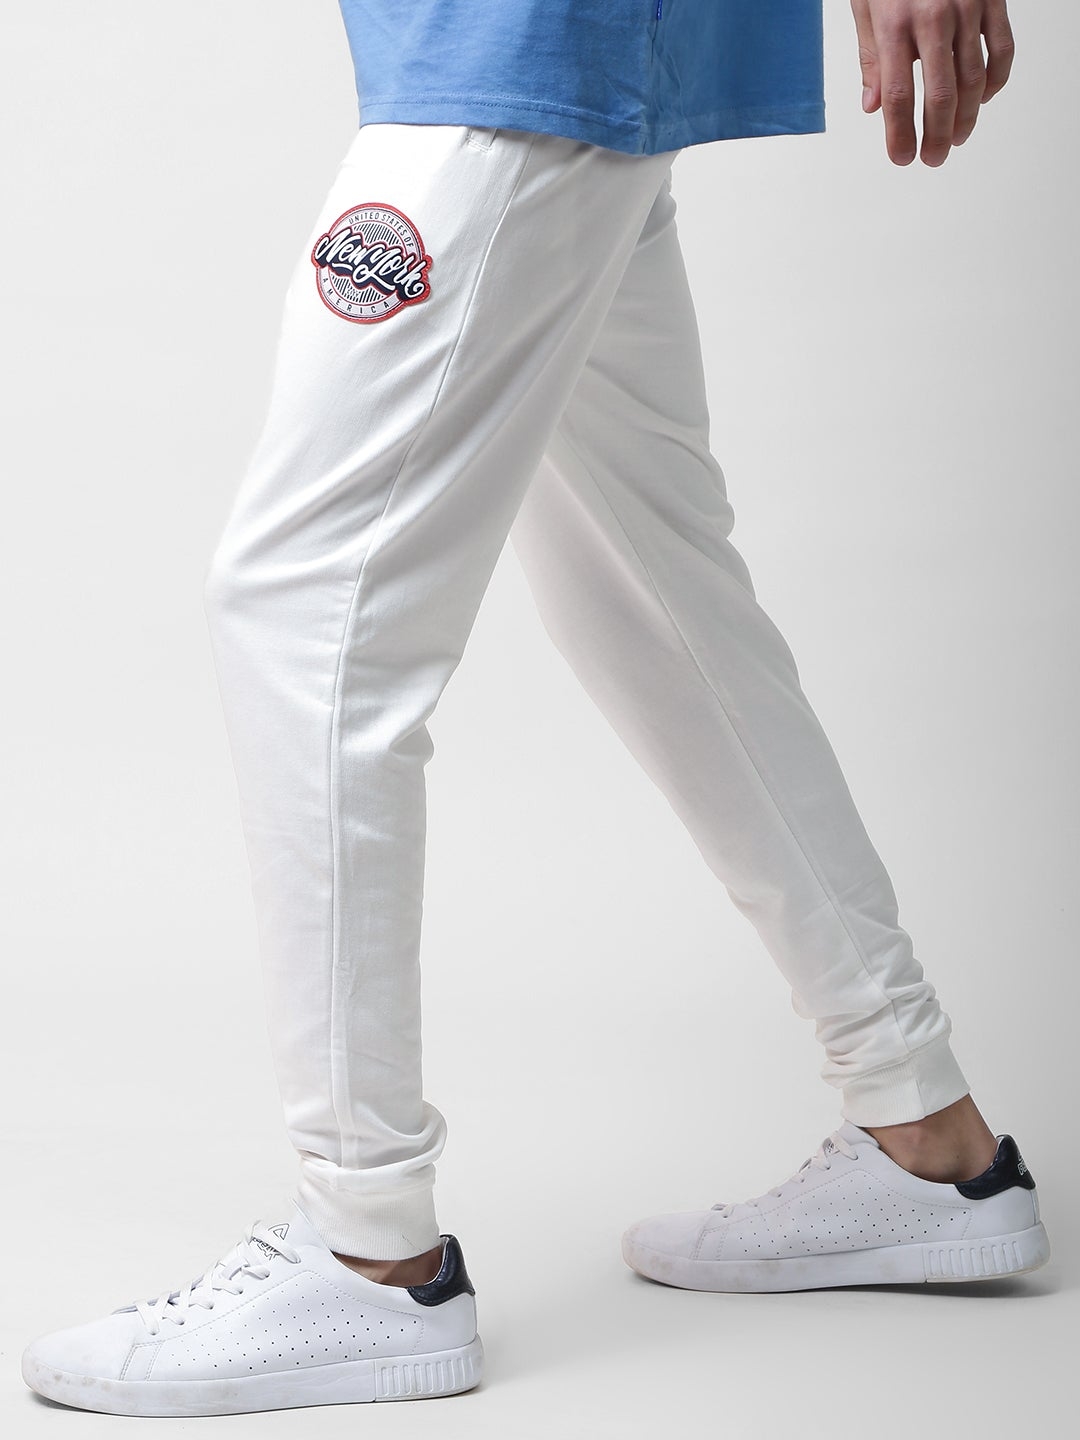 Blue Saint | Solid Bright White Casual Wear Basic Joggers